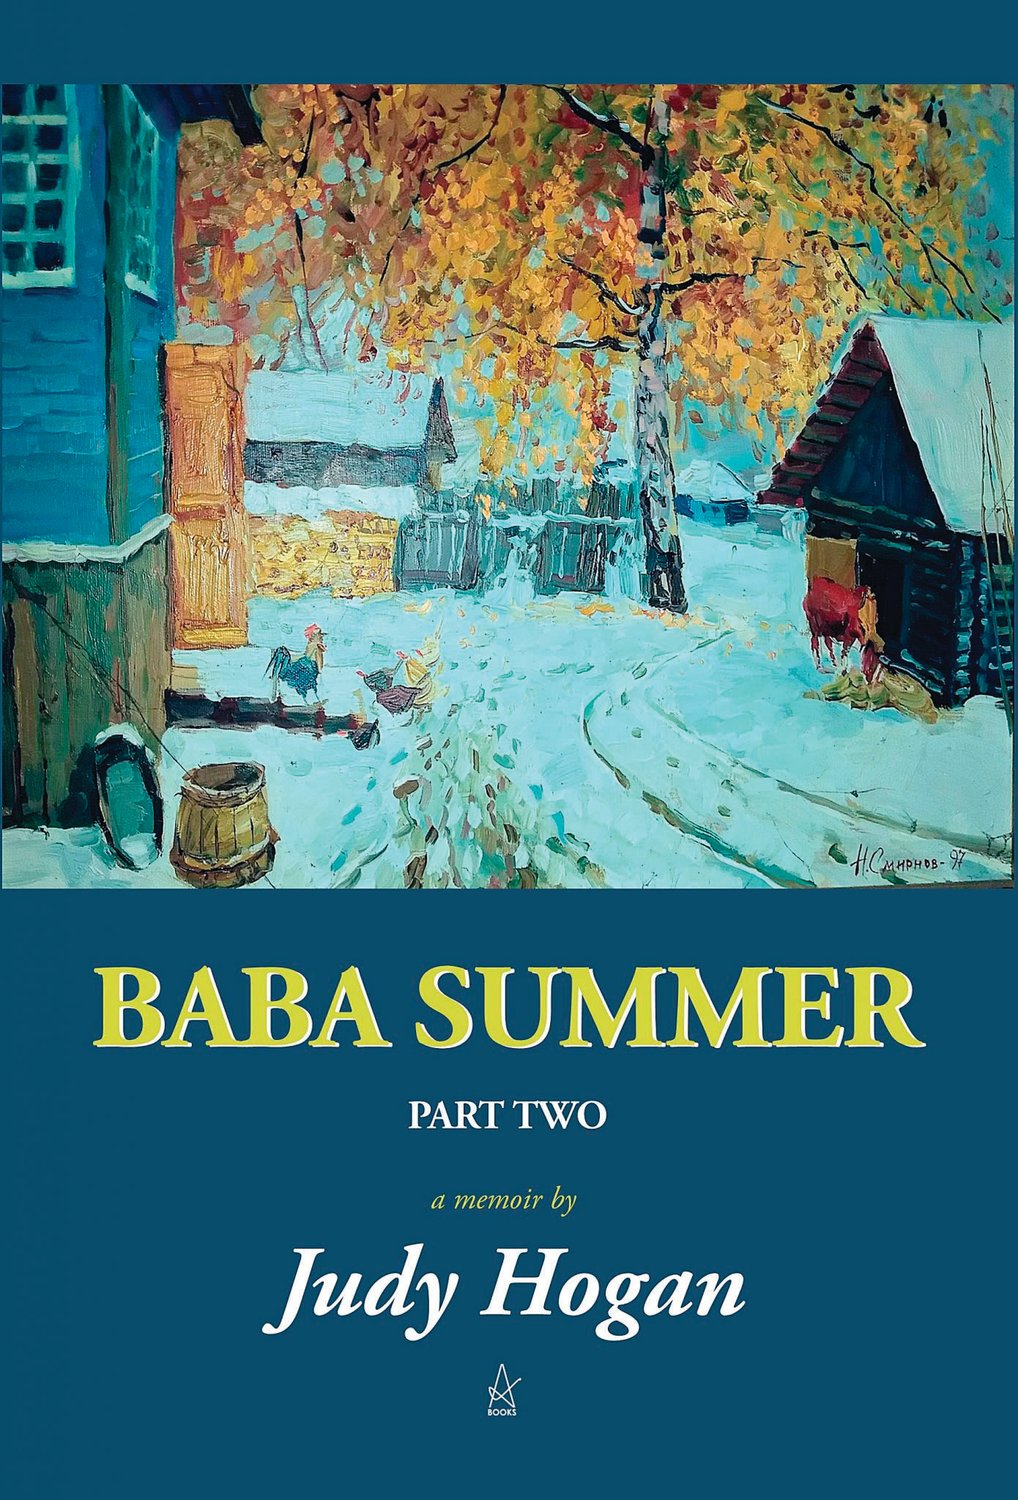 'Baba Summer' is part of Hogan's series of memoirs about her time in Russia.